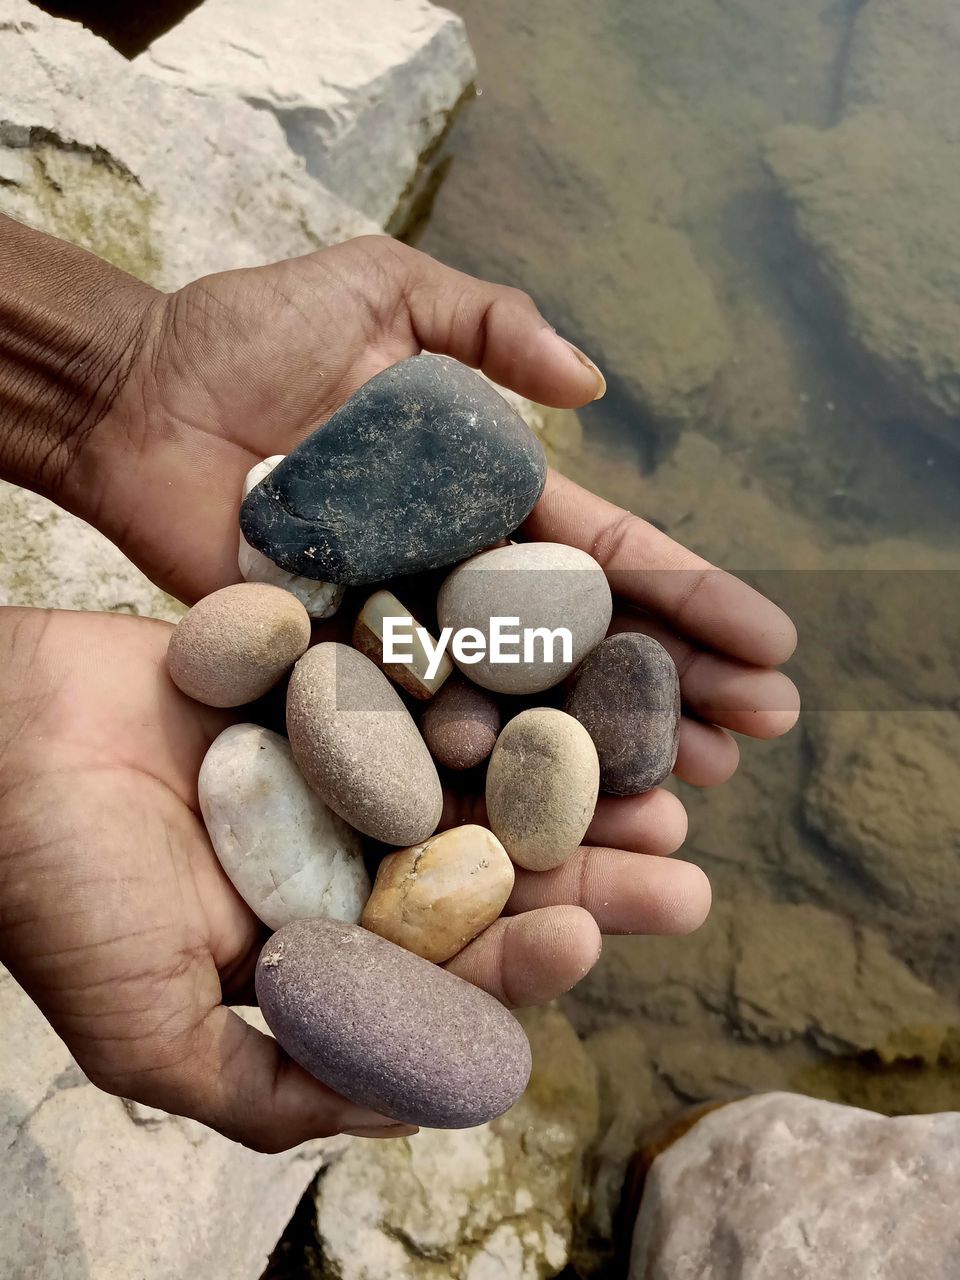 round shape stones in man hand Stone Material Stone Material Human Hand Holding Handful Rock - Object Water High Angle View Close-up Stone - Object Pebble Stack Rock Coast Hands Cupped